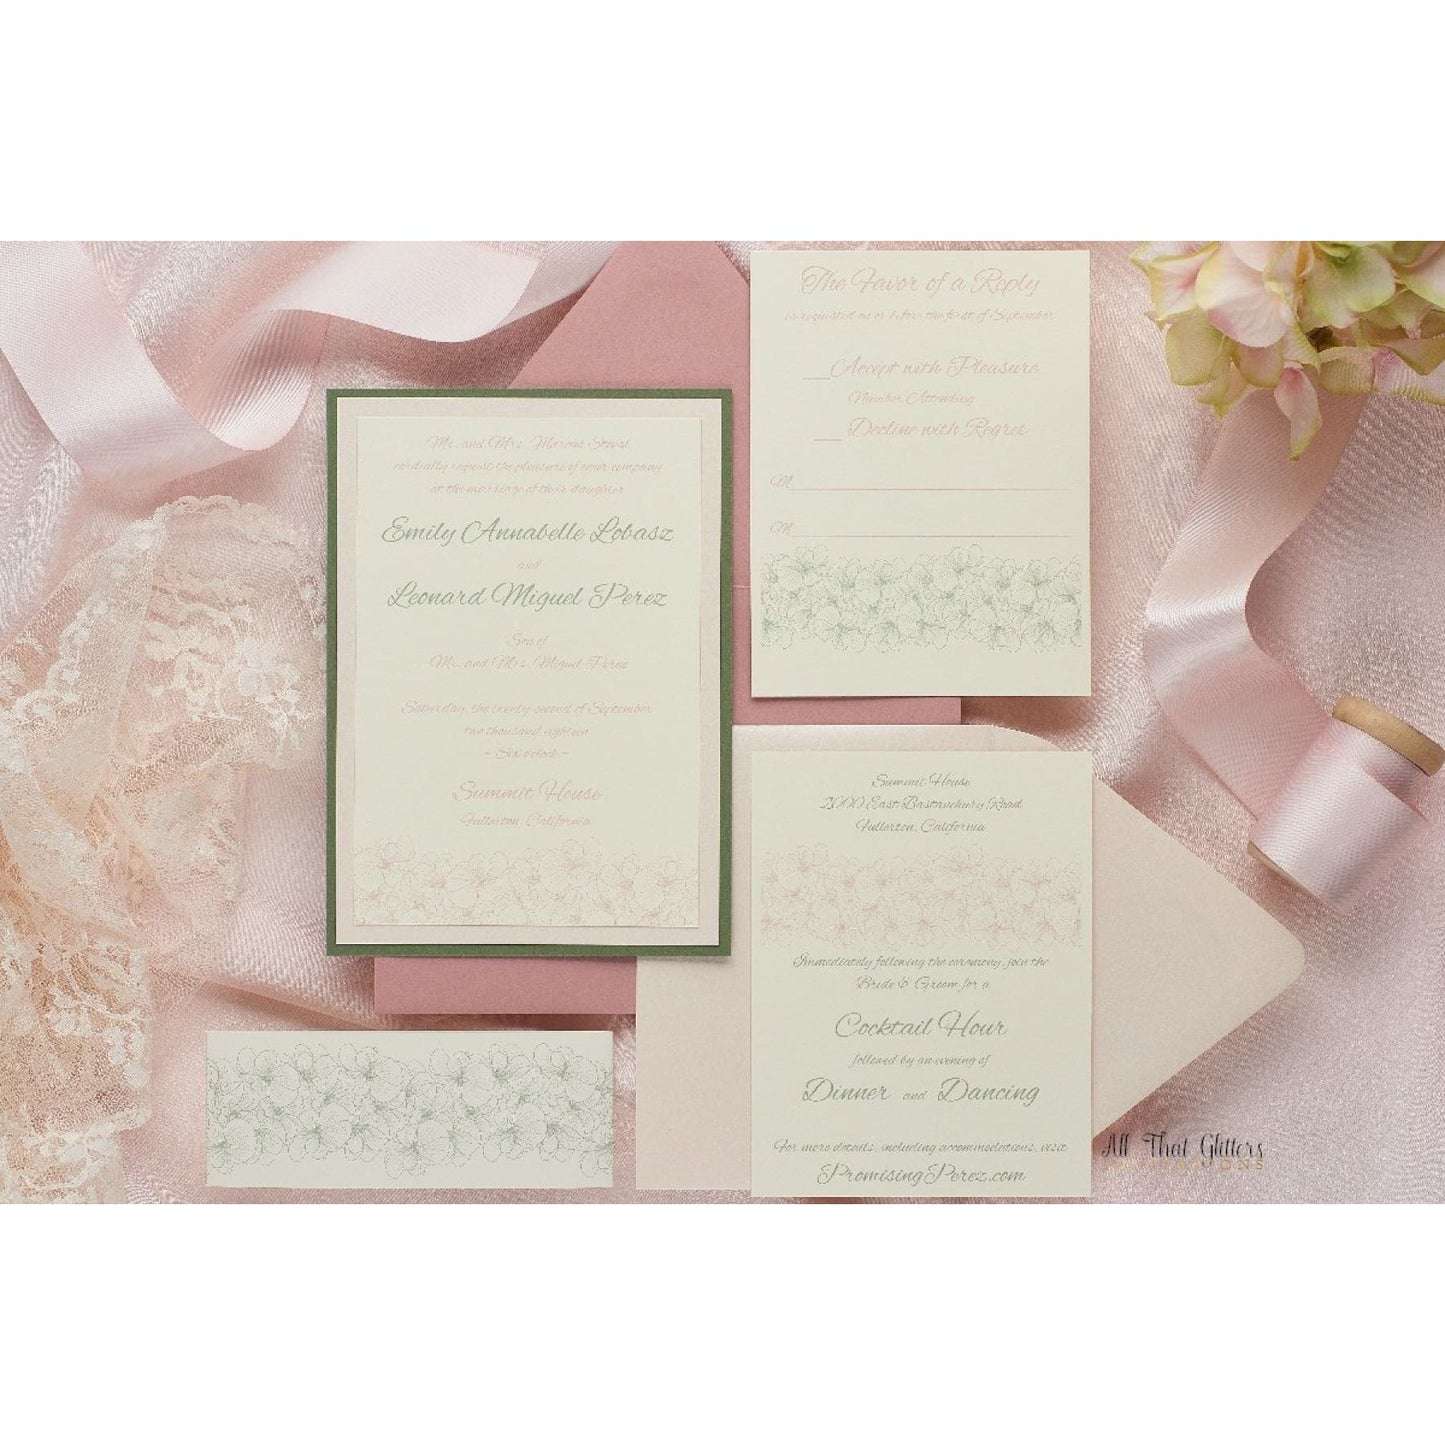 Whimsical Wedding Invitation with Flowers, Emily - All That Glitters Invitations